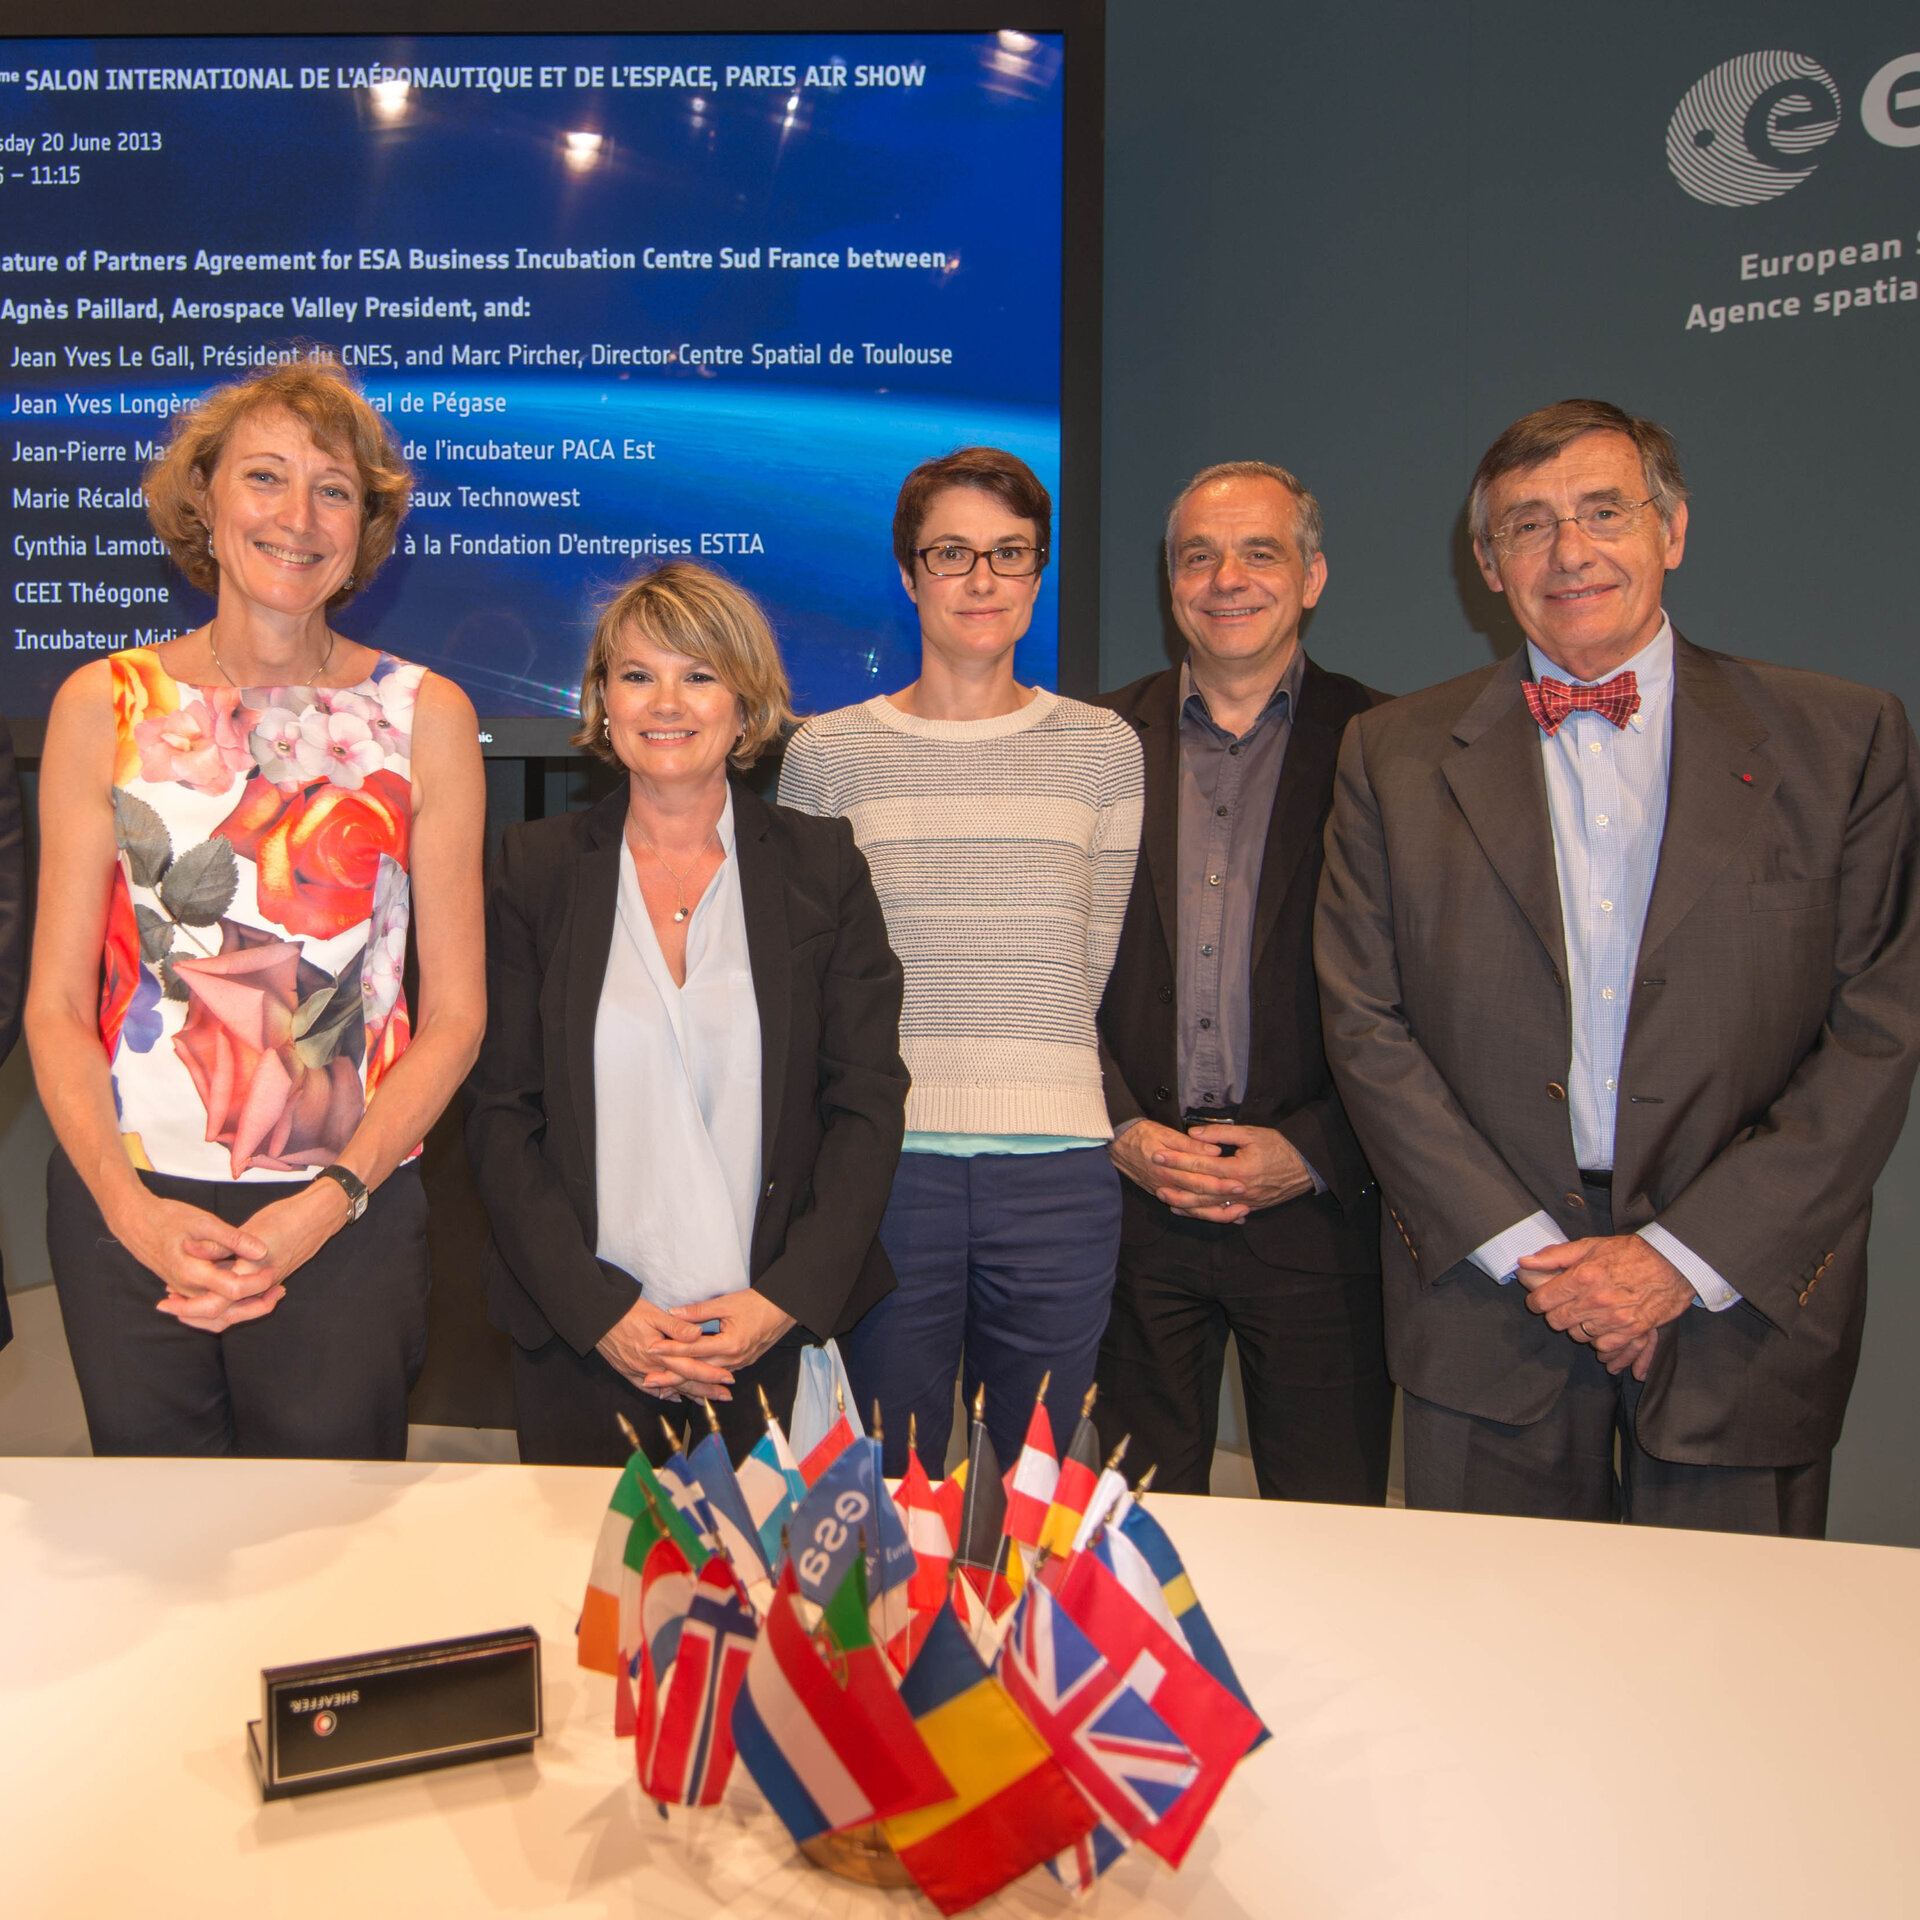 Signature of Partners Agreement for ESA Business Incubation Centre Sud France